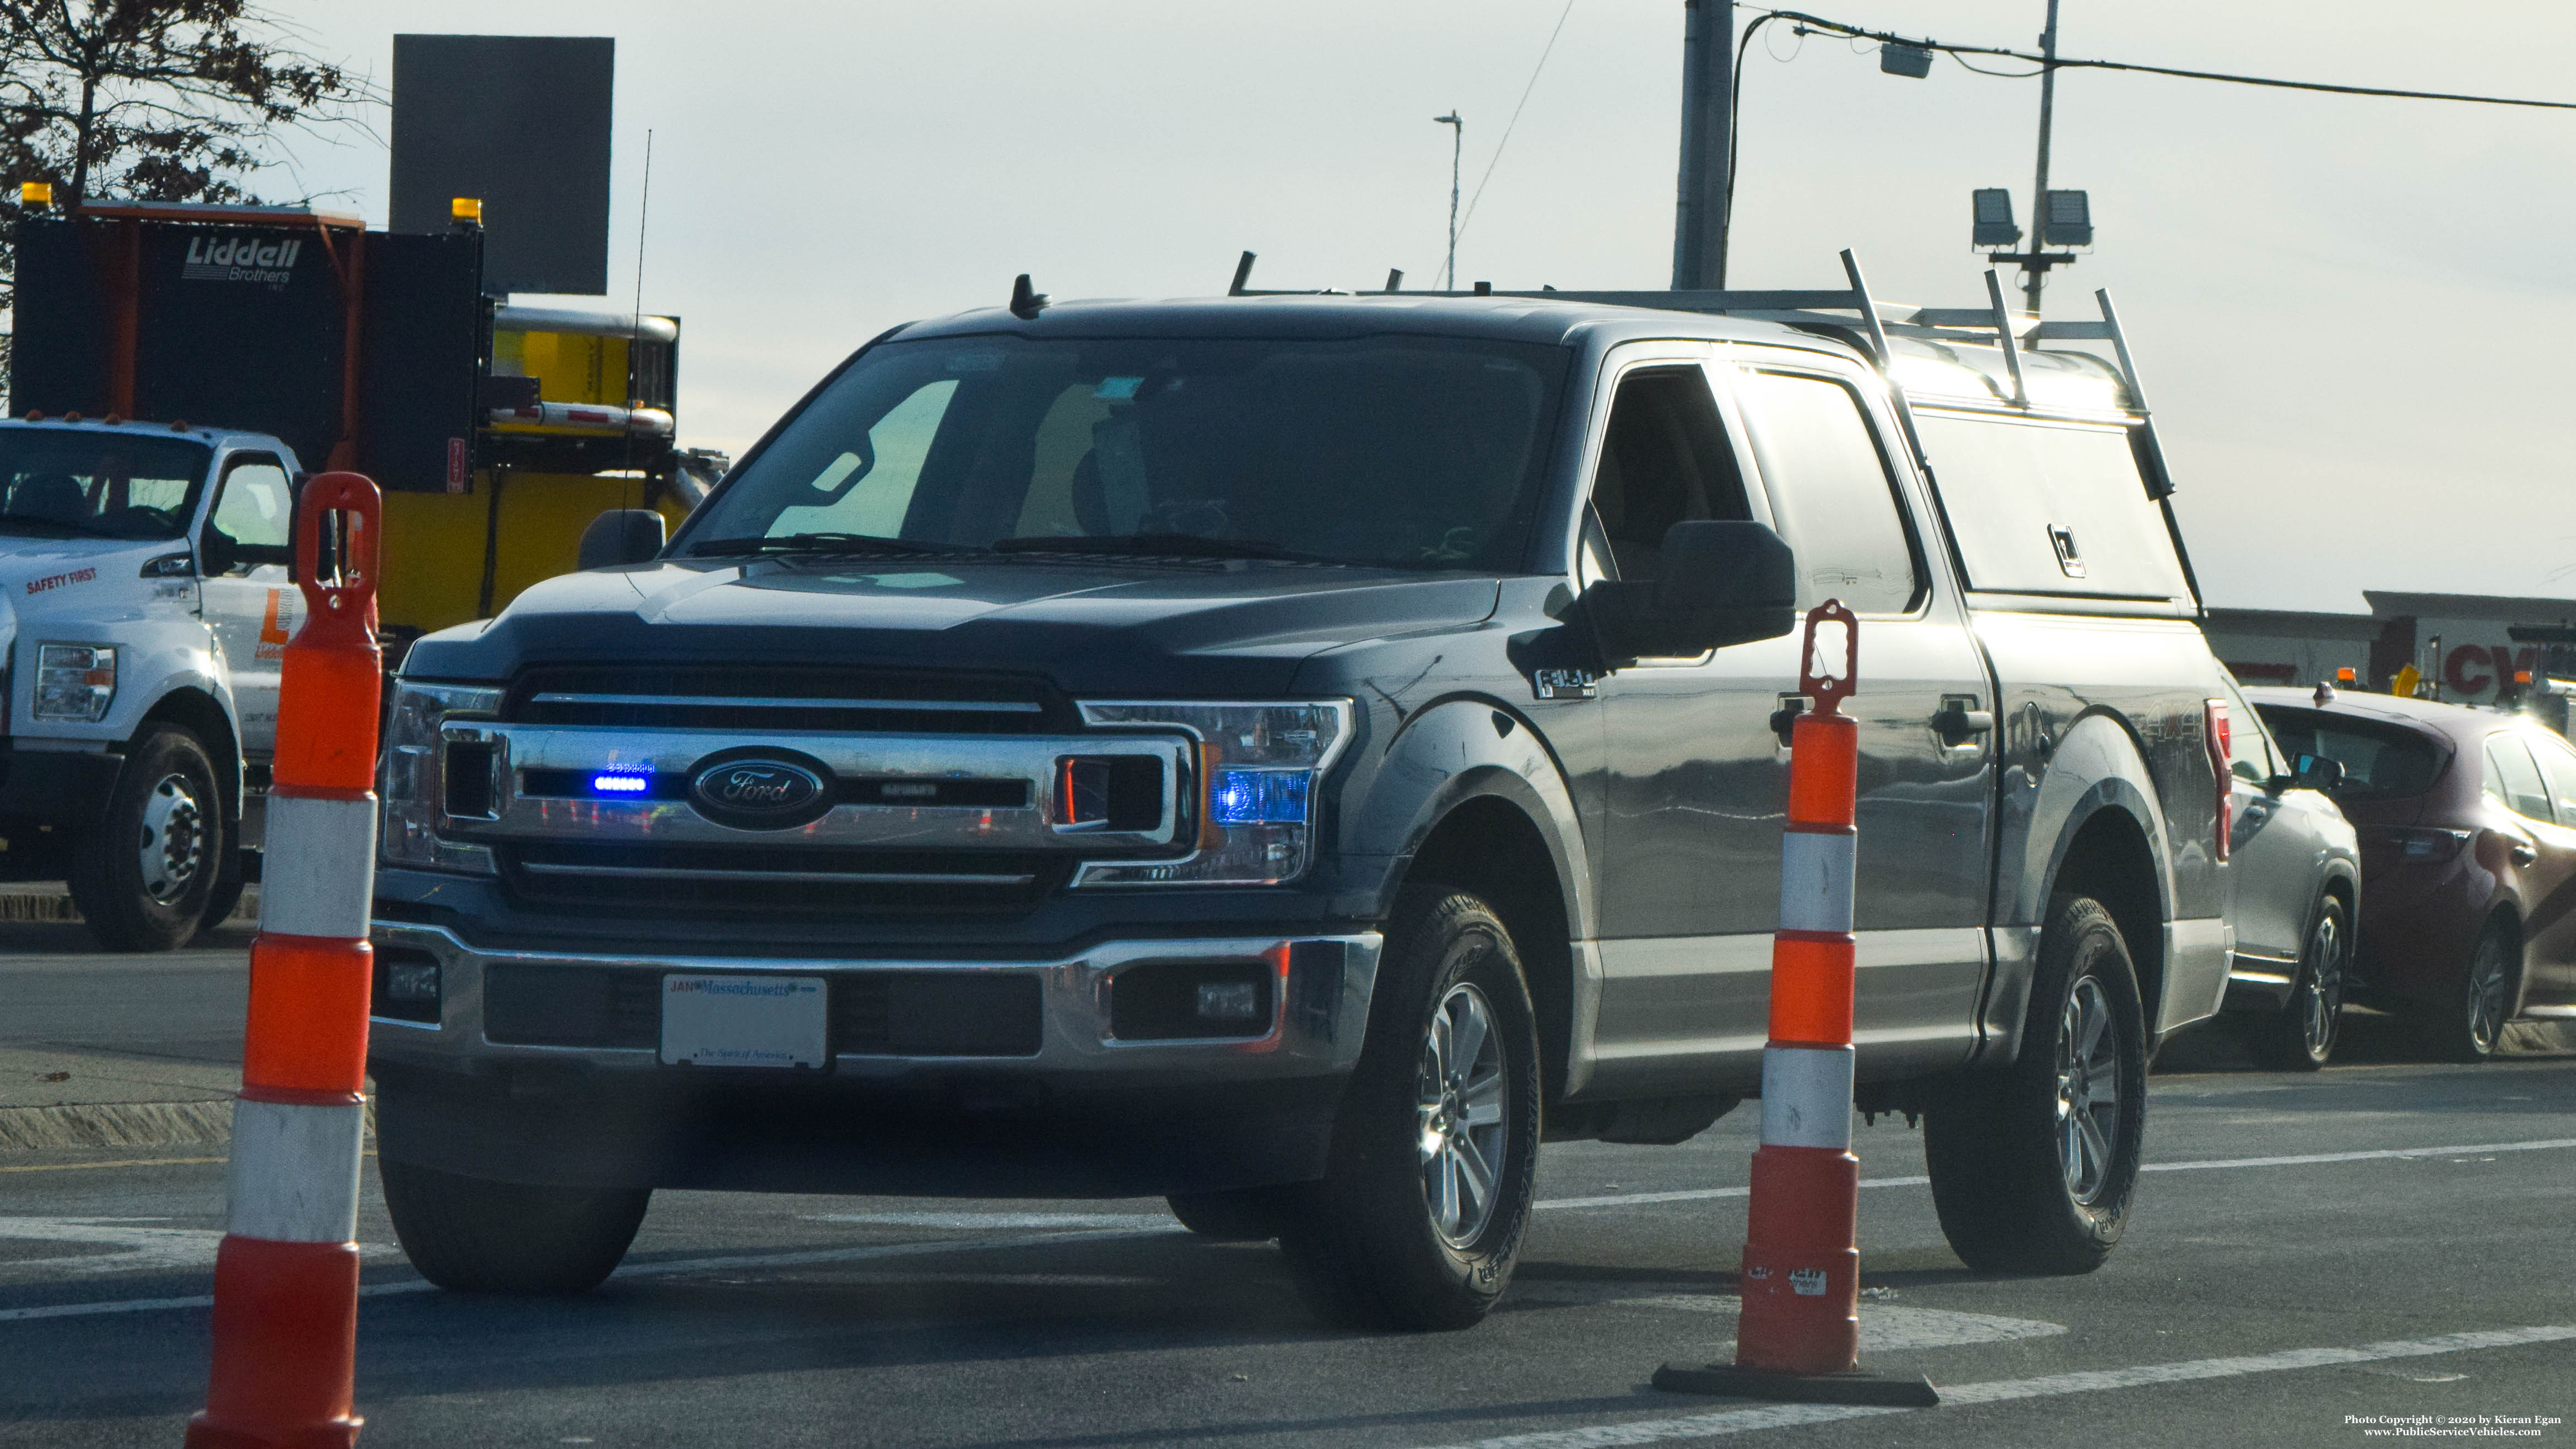 A photo  of Massachusetts State Police
            Unmarked Unit, a 2015-2019 Ford F-150 Crew Cab             taken by Kieran Egan